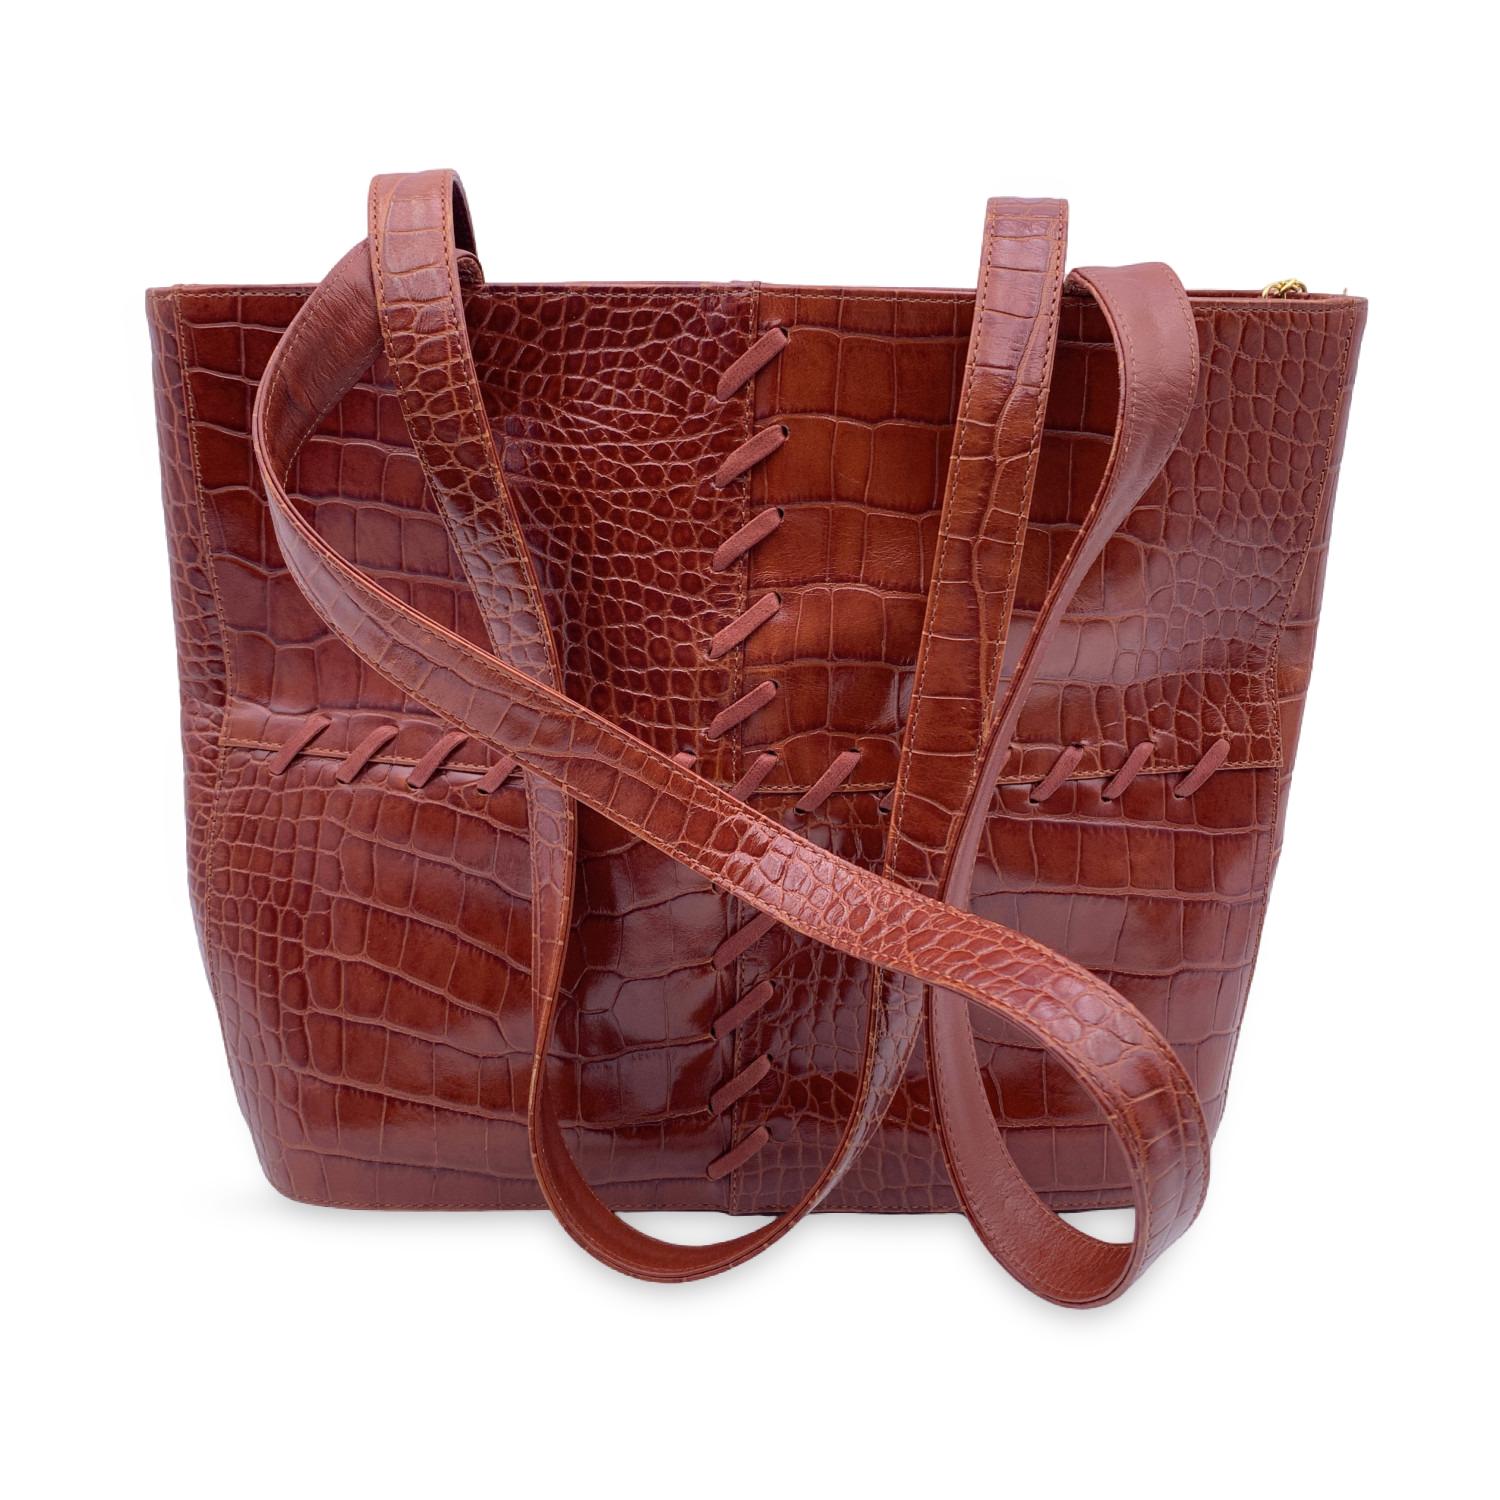 Yves Saint Laurent Vintage Brown Embossed Leather Stitch Tote Bag In Excellent Condition For Sale In Rome, Rome